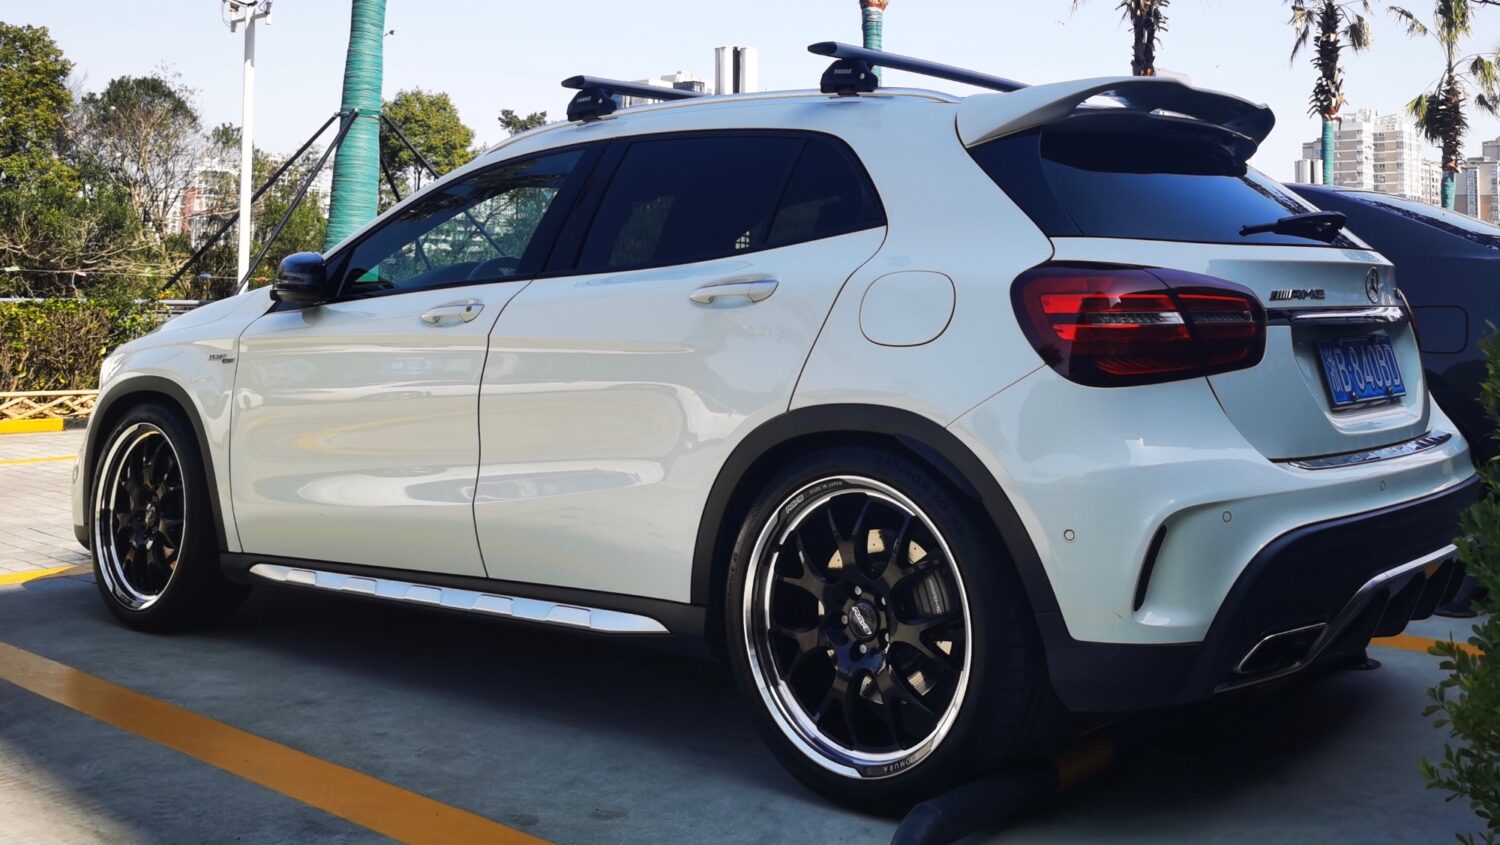 Mercedes-Benz GLA Class with 20×8.5-inch Rays Homura 2x7RA